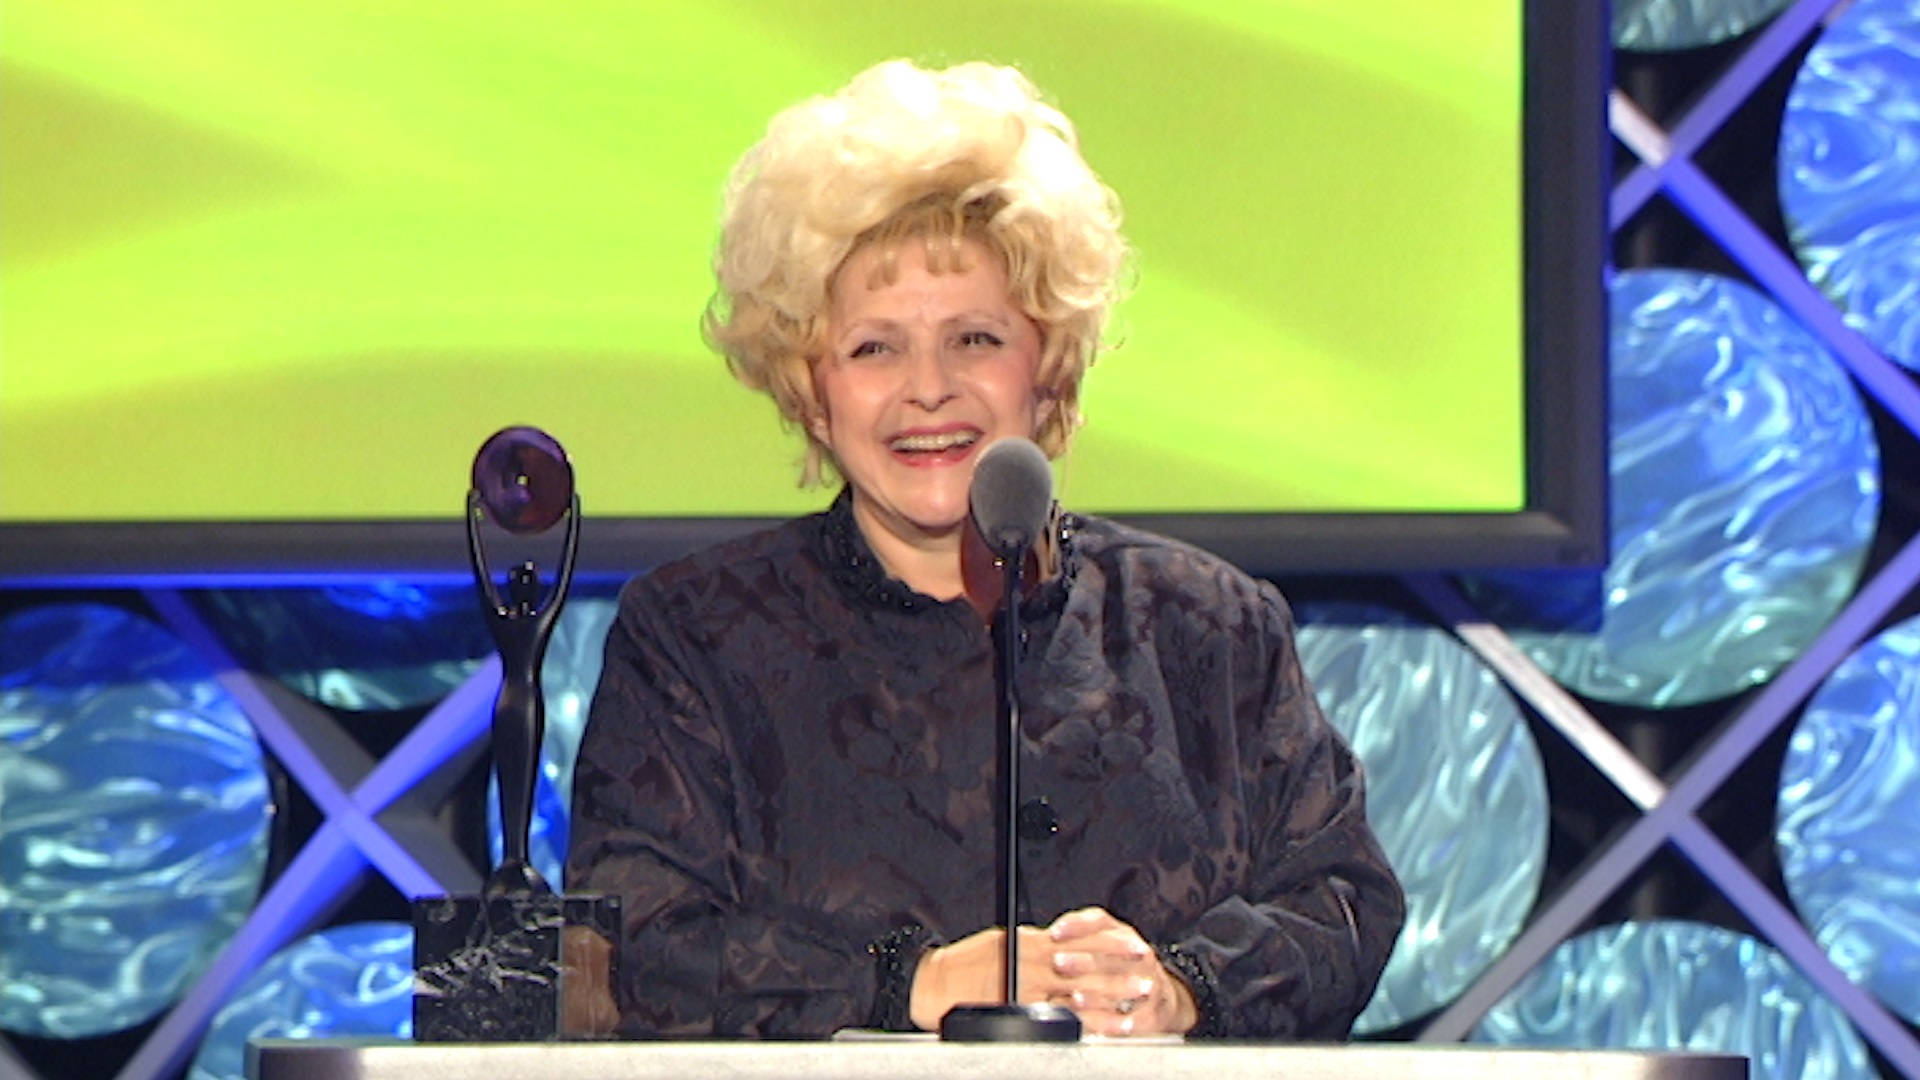 Brenda Lee at Rock and Roll Hall of Fame Induction Wallpaper